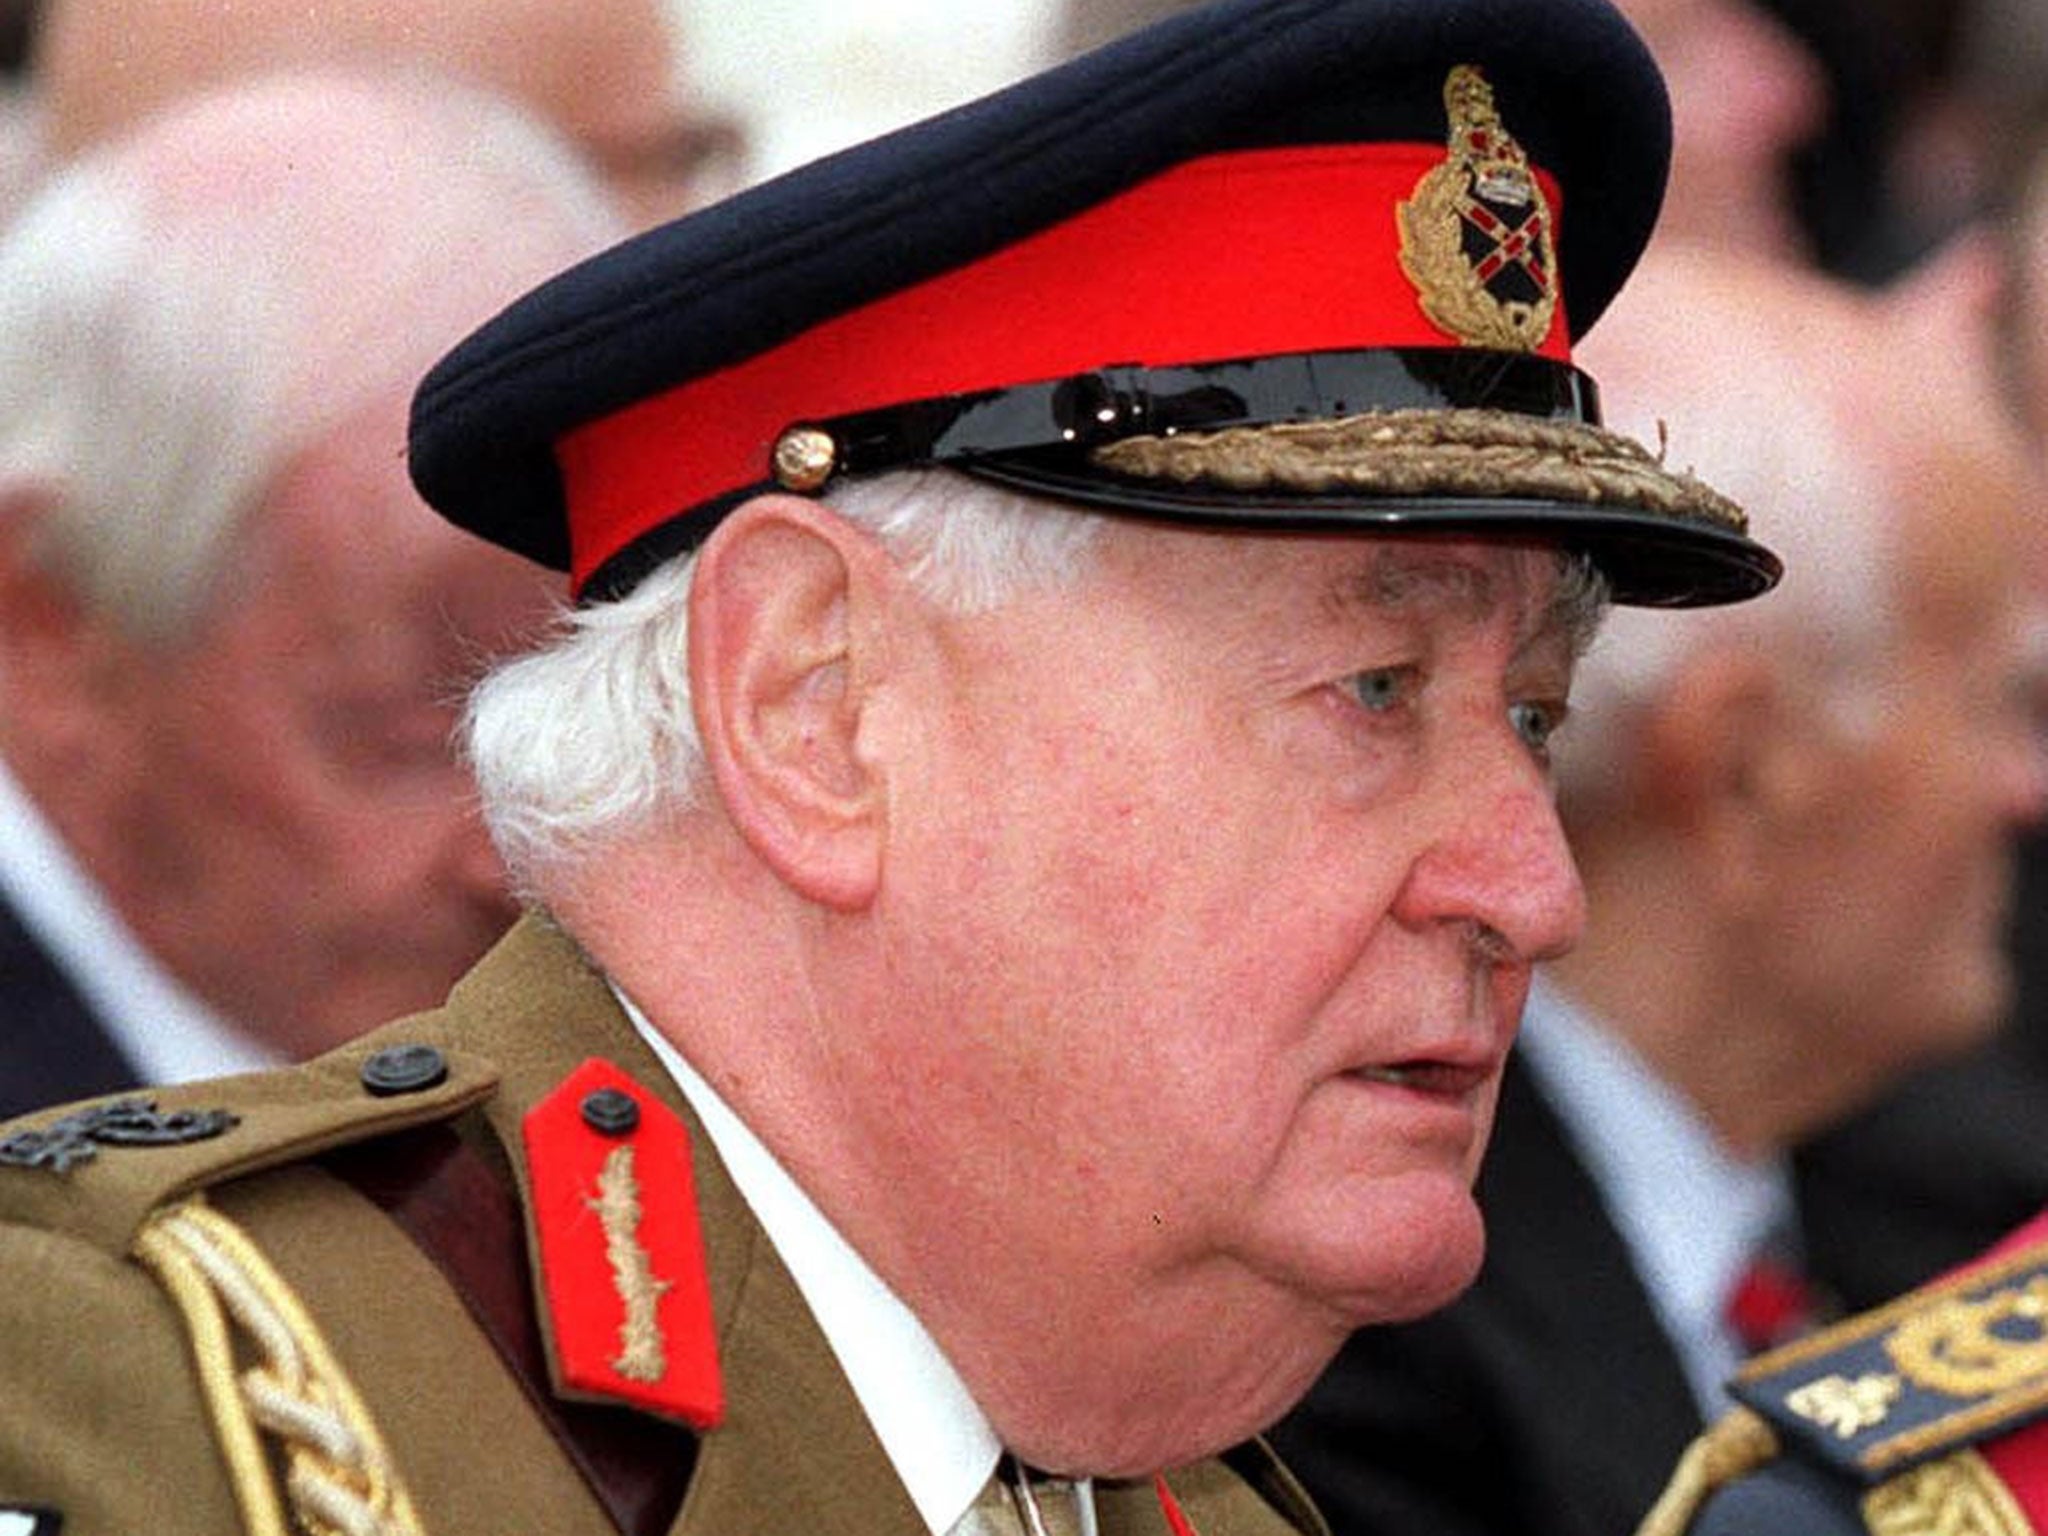 Lord Bramall has strongly denied the allegations